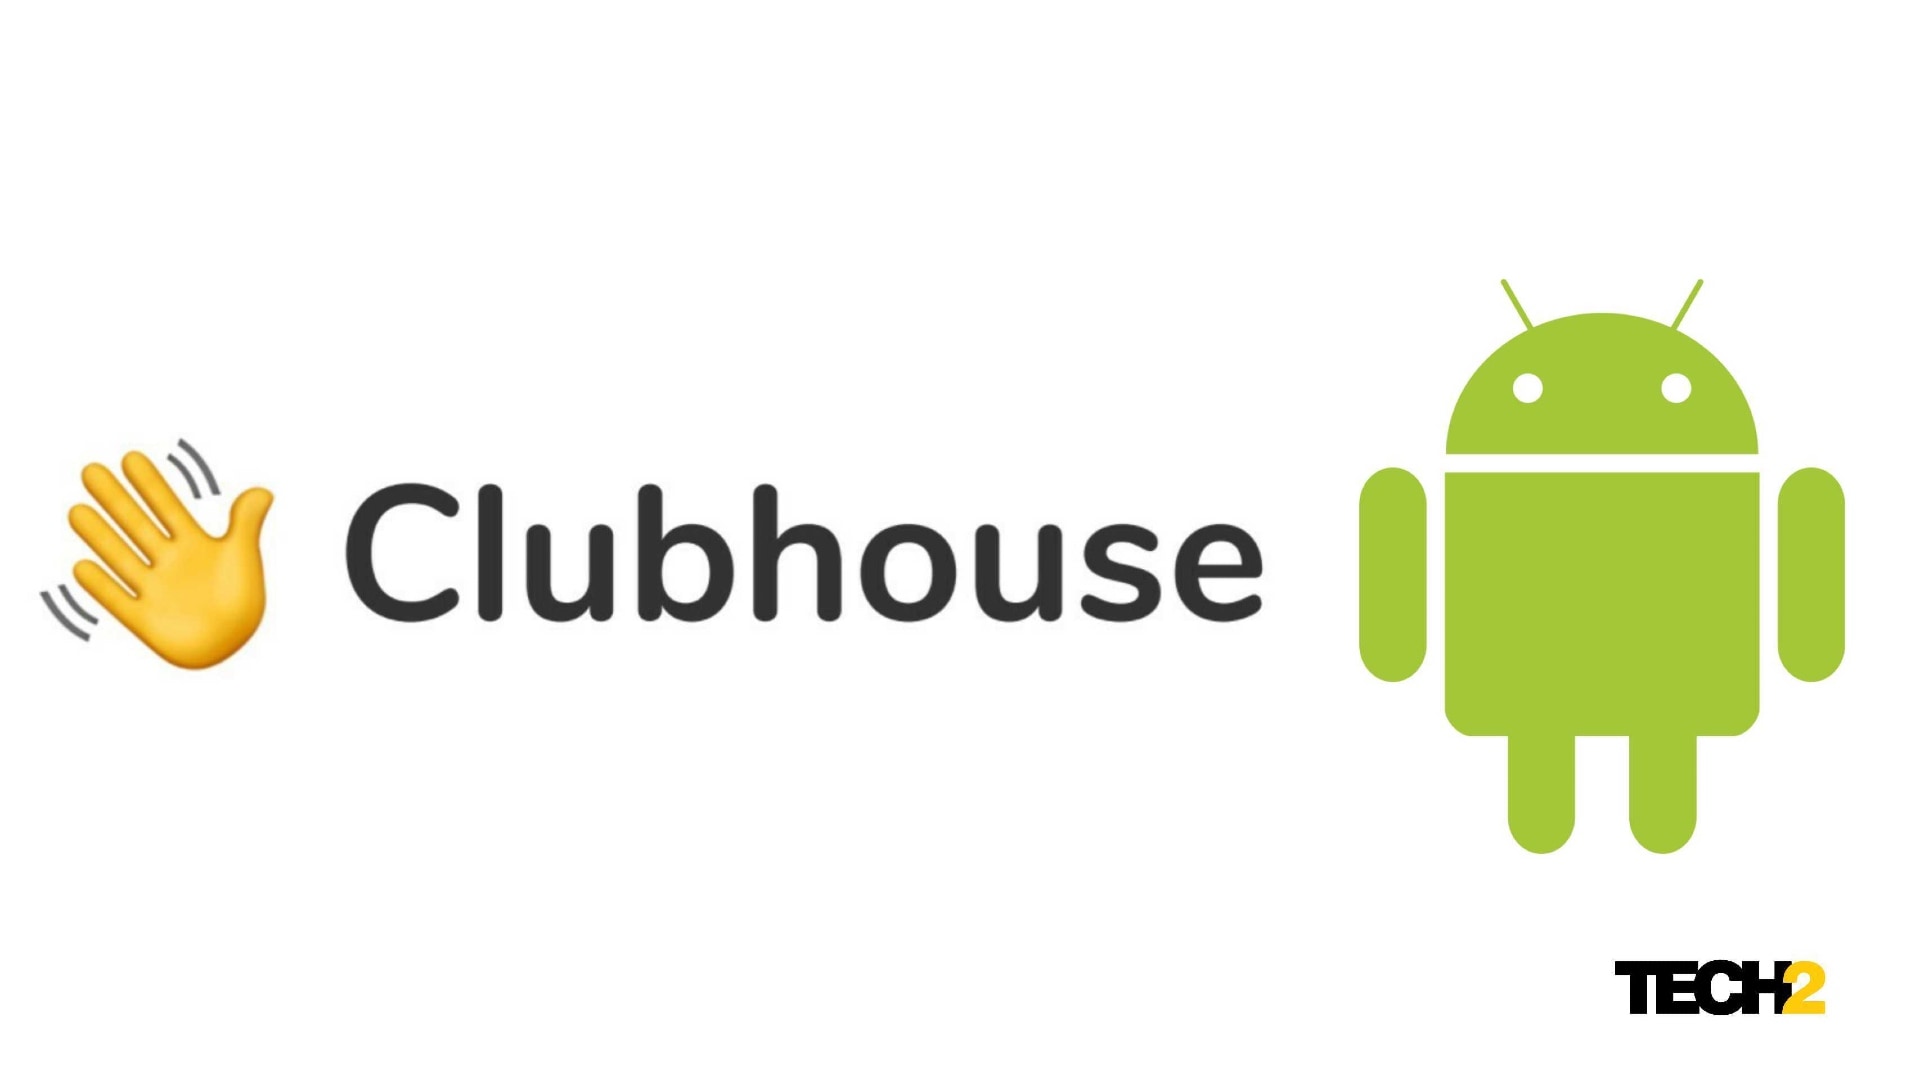 The invite-only Clubhouse app is now available on Android. Image: tech2